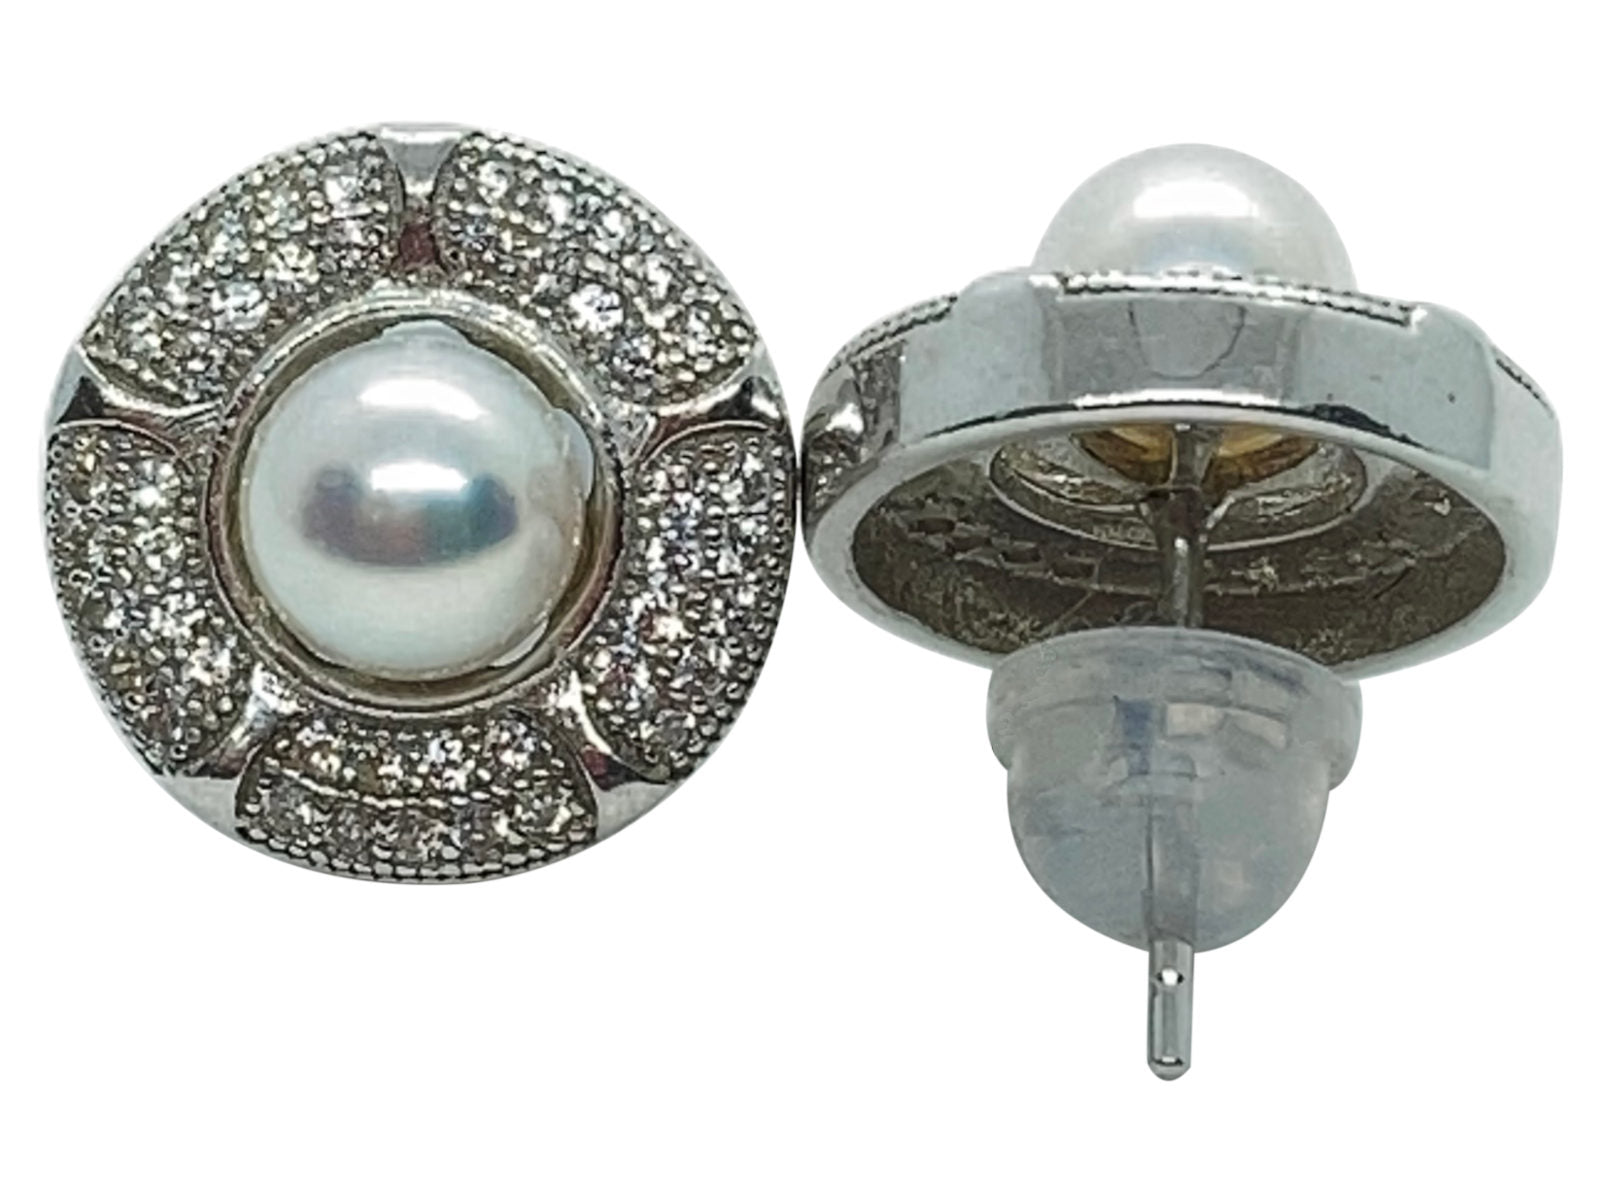 Japanese Akoya Pearl Stud Earrings Ornate Style Base On Sterling Silver With Cubic Zirconia Front And Back View